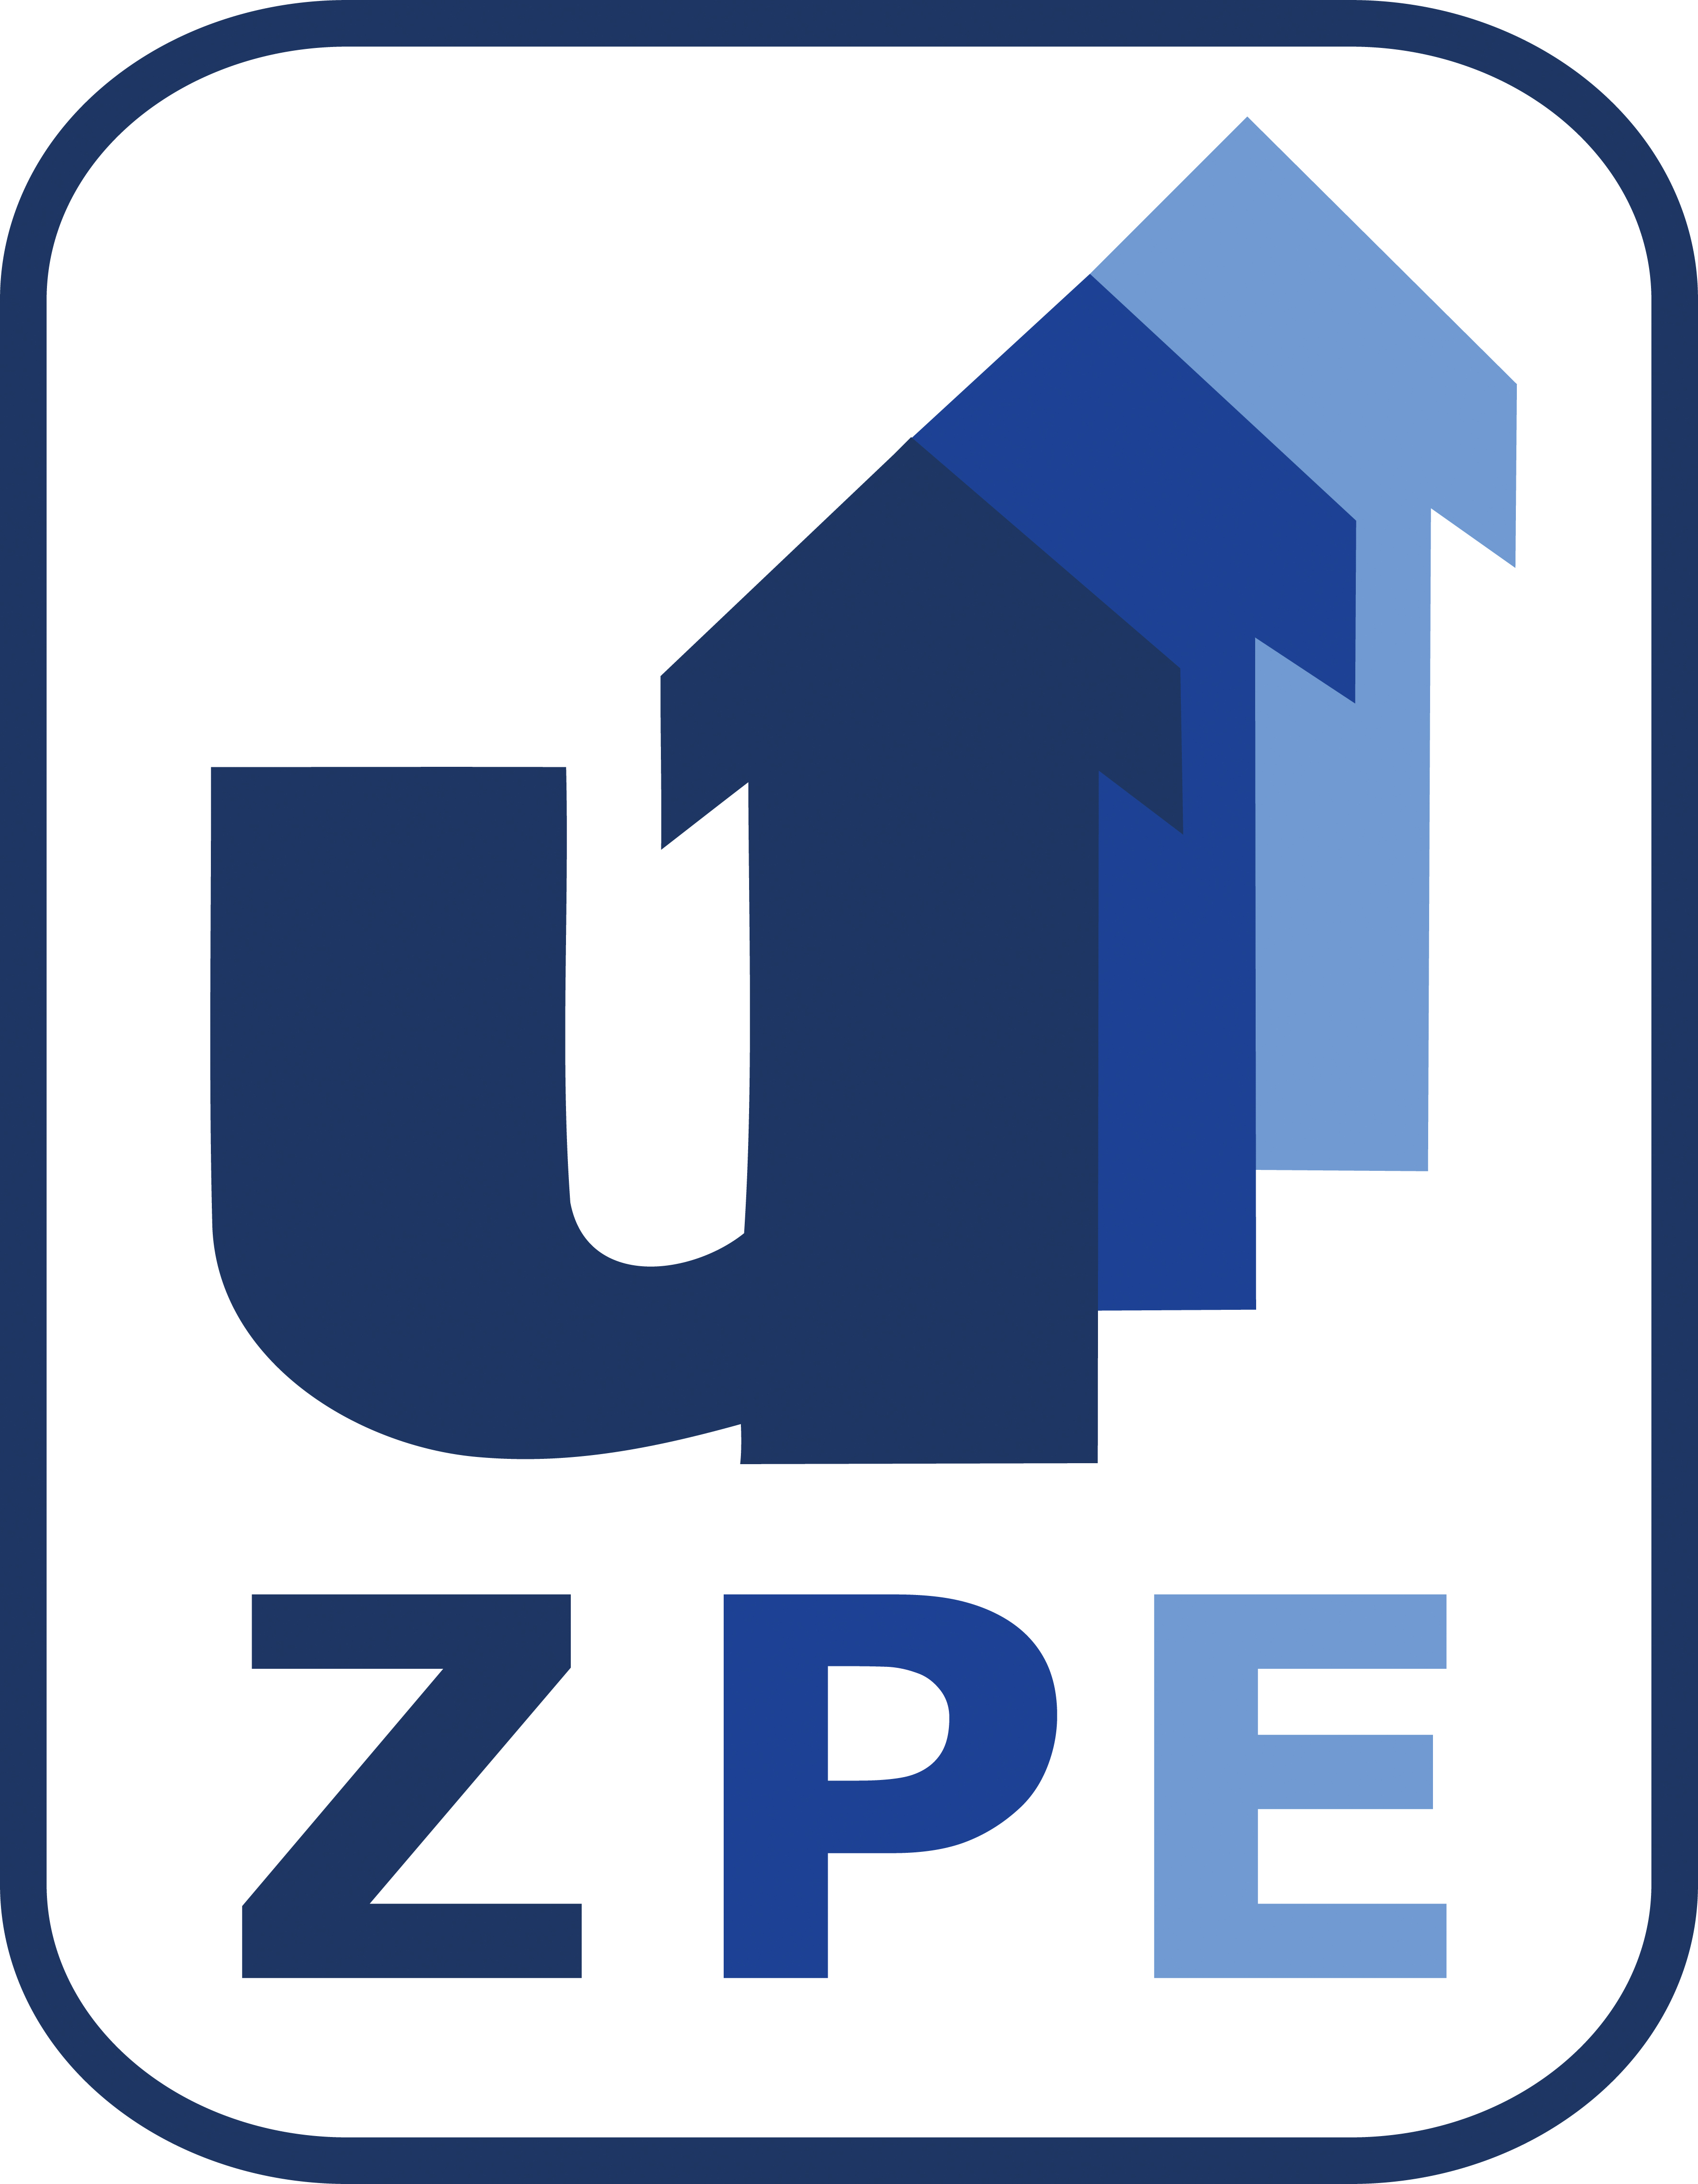 ZPE logo has blue capital letter, surrounded by a curved rectangle and a U shape above the word that turns into arrows